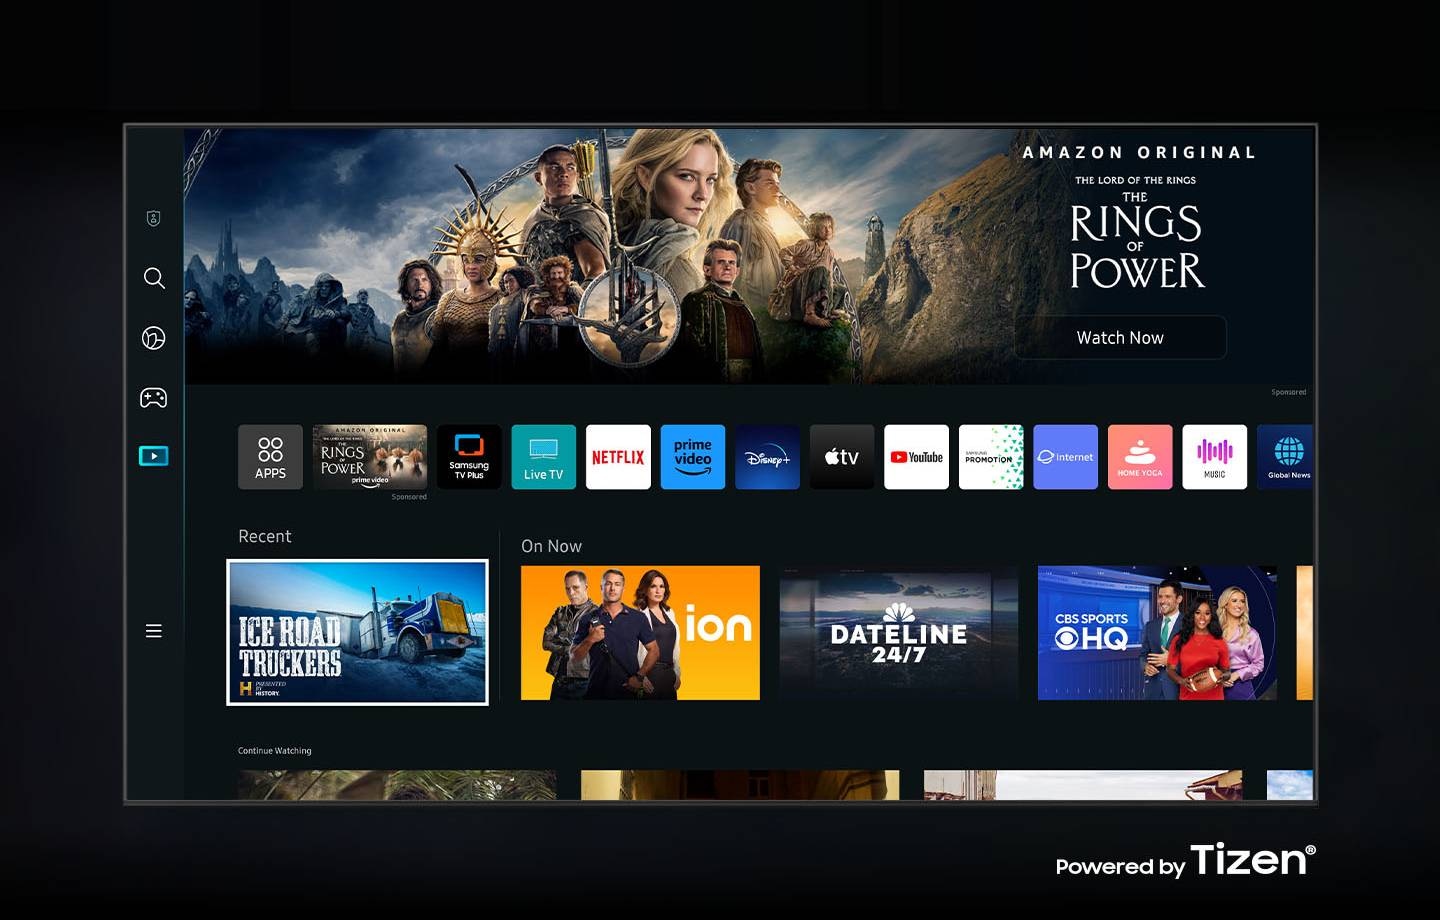 The new Smart Hub UI powered by Tizen is displayed to show a wide variety of OTT services and content being serviced.